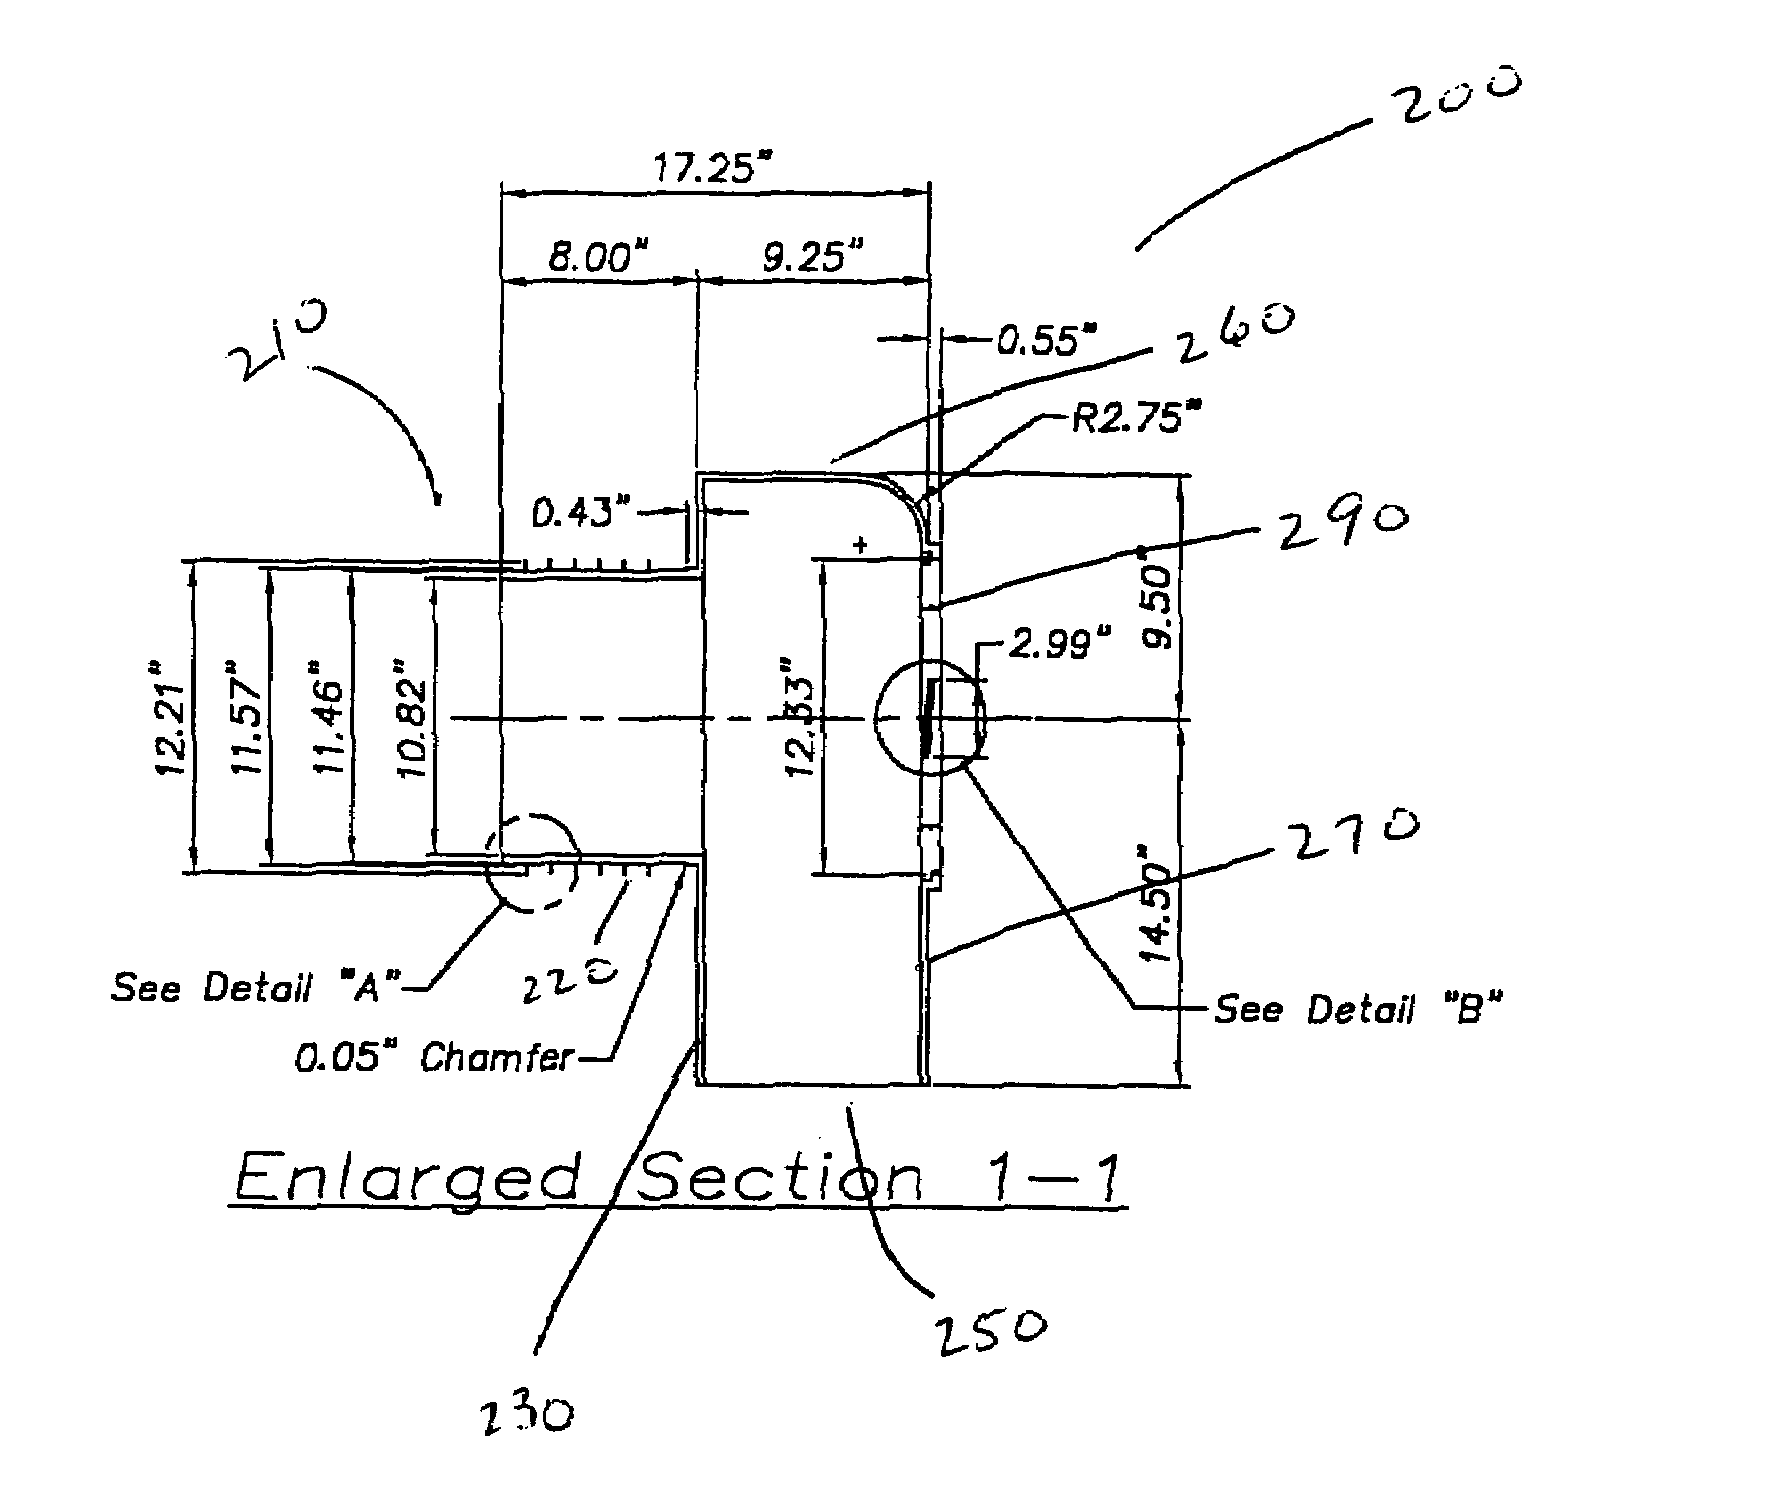 Apparatus for removing dissolved and suspended contaminants from waste water